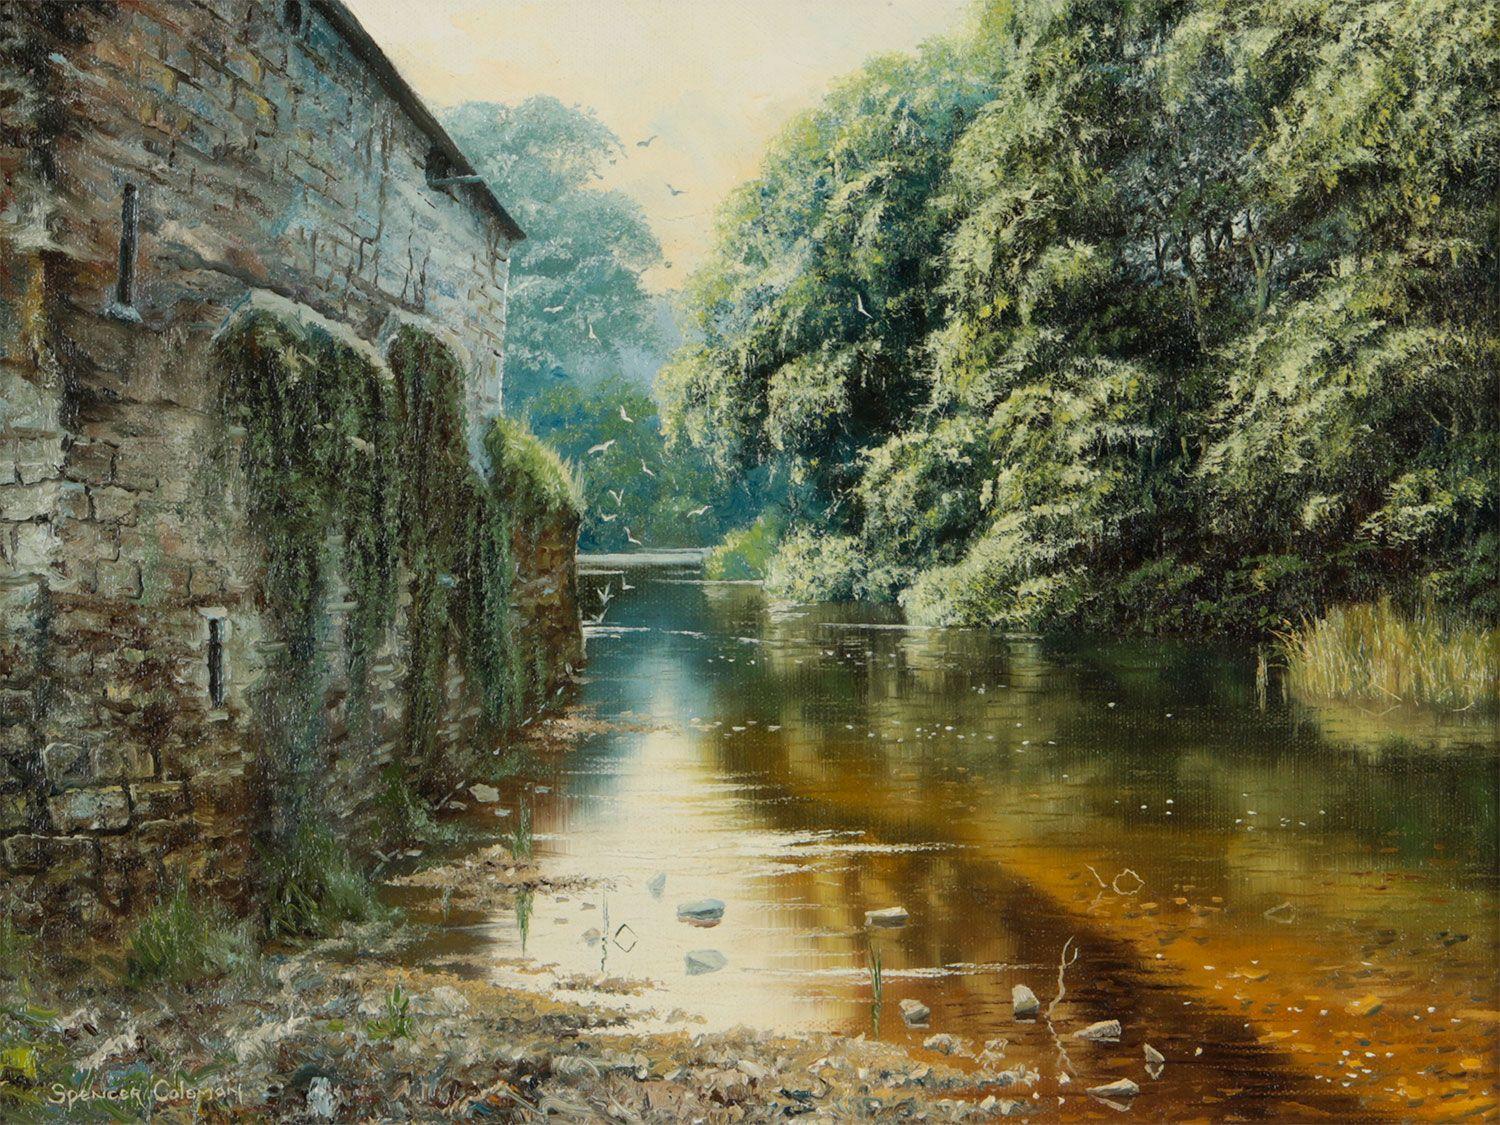 Unique Original Painting of a Beautiful Rural Countryside River Scene with Birds in Ireland. Oil on canvas, signed. 

Art measures 16 x 12 inches 
Frame measures 21 x 17 inches 

Spencer Coleman (b. 1952) is widely considered to be one of the